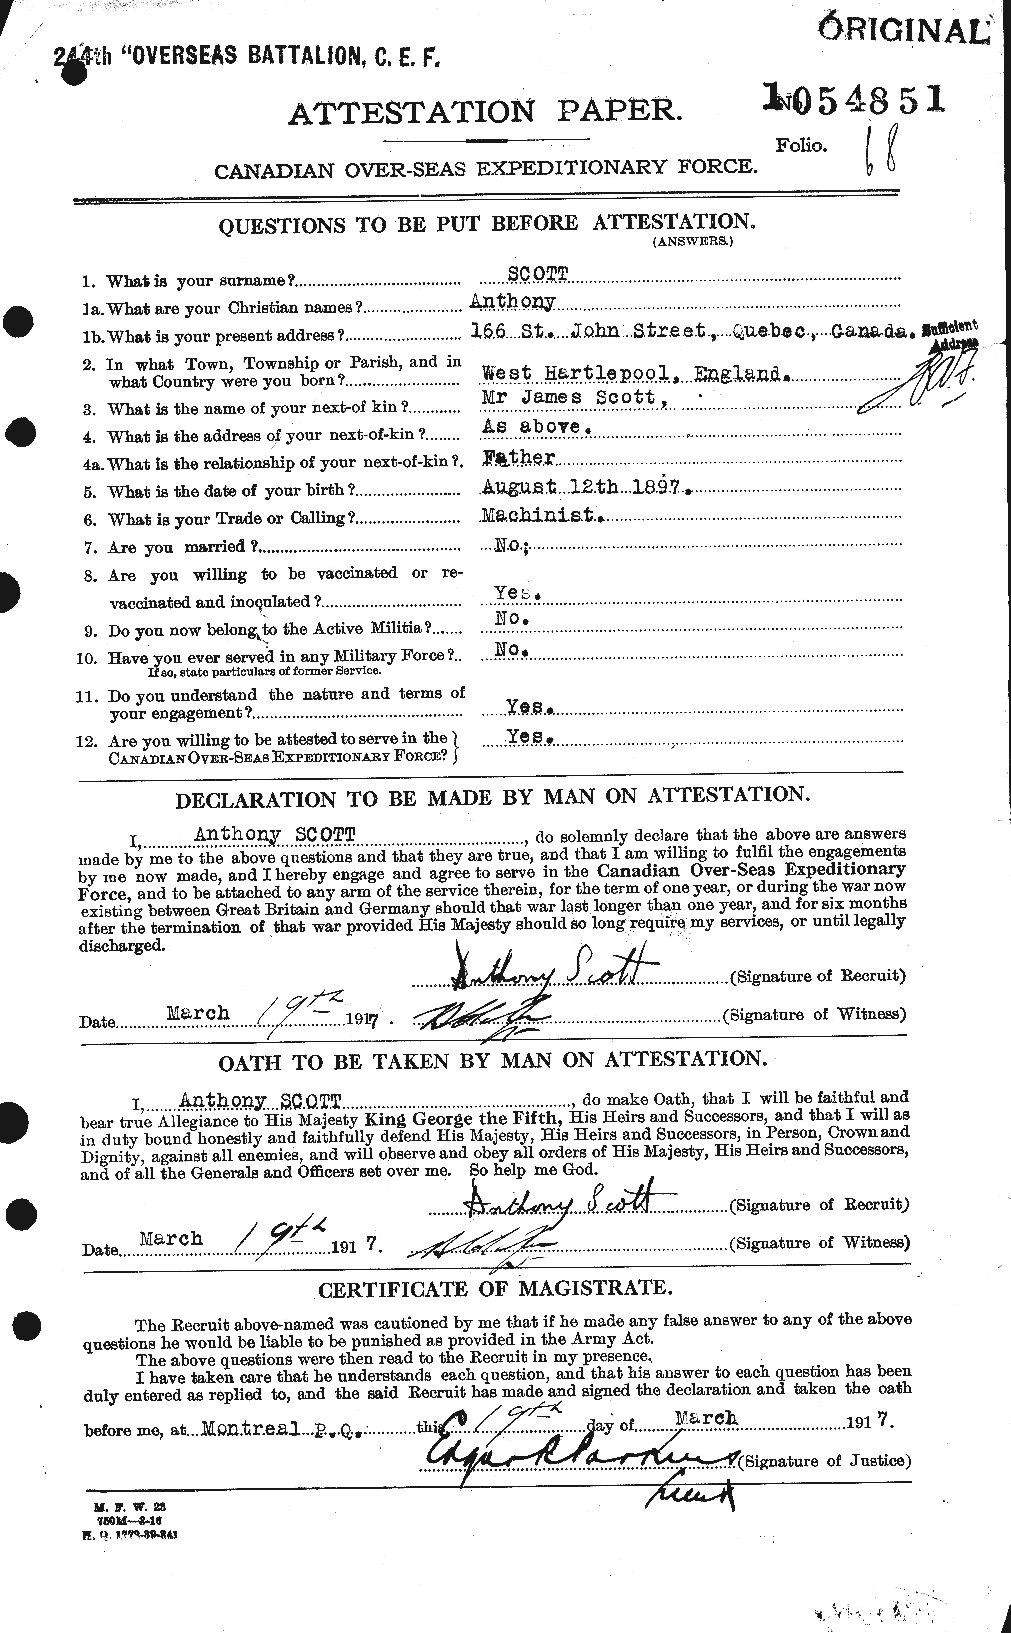 Personnel Records of the First World War - CEF 086434a